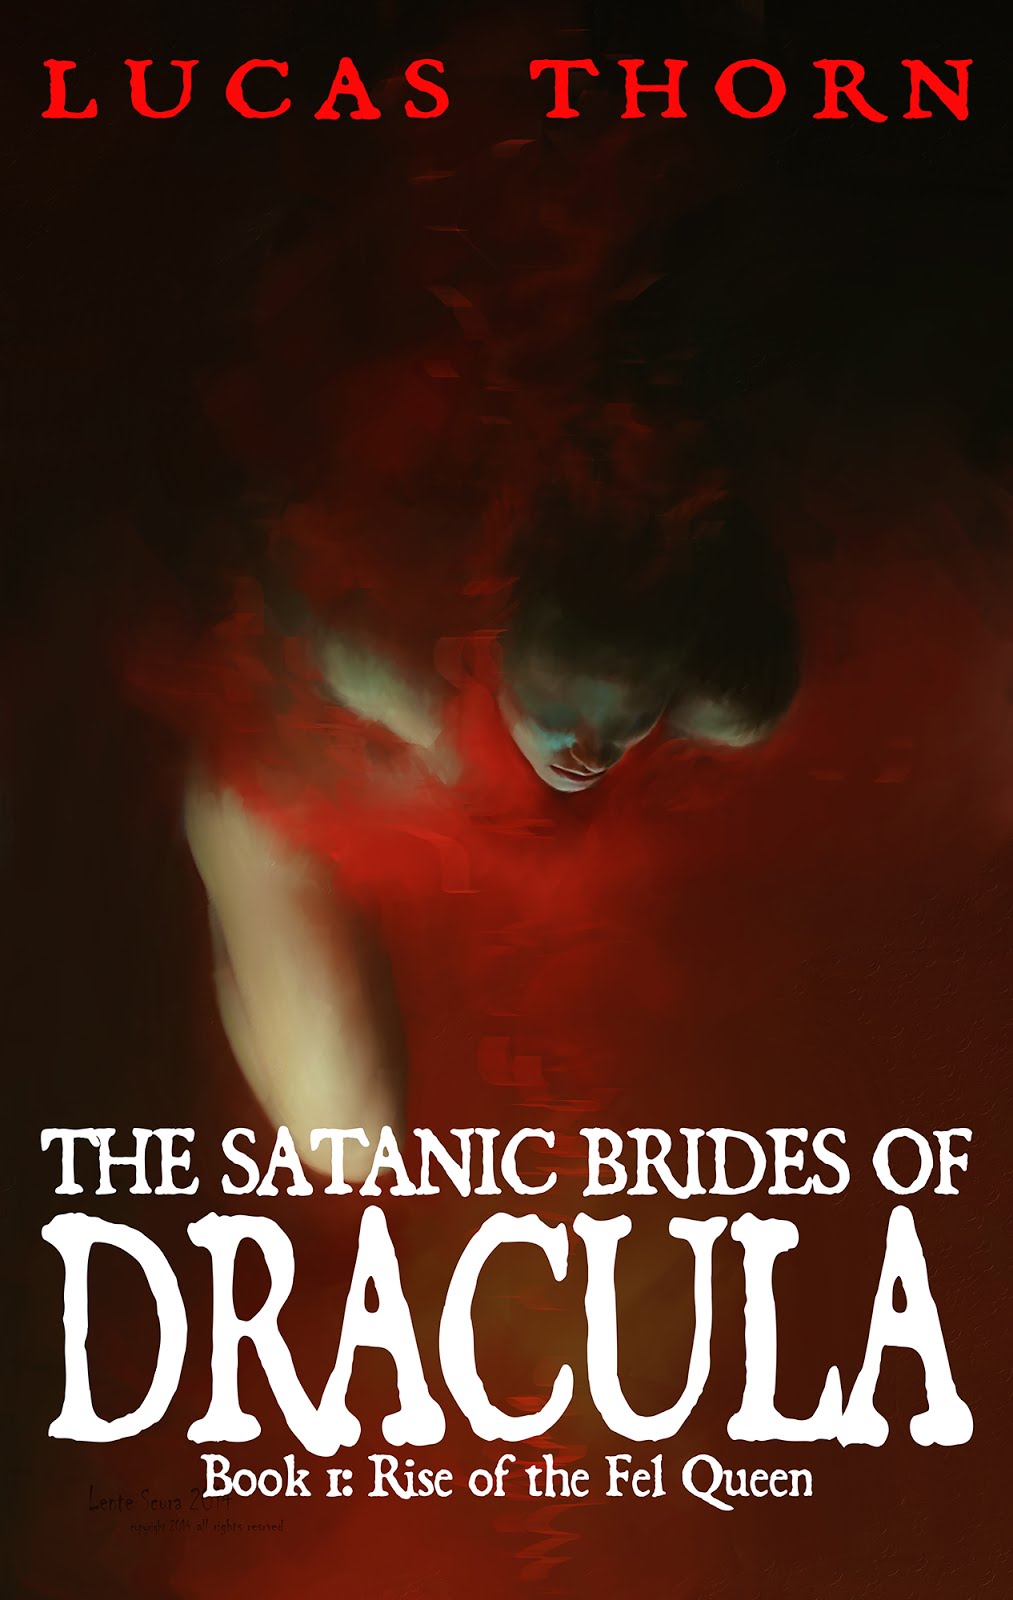 'The Satanic Brides of Dracula' is a fiendishly original new Gothic Horror Series